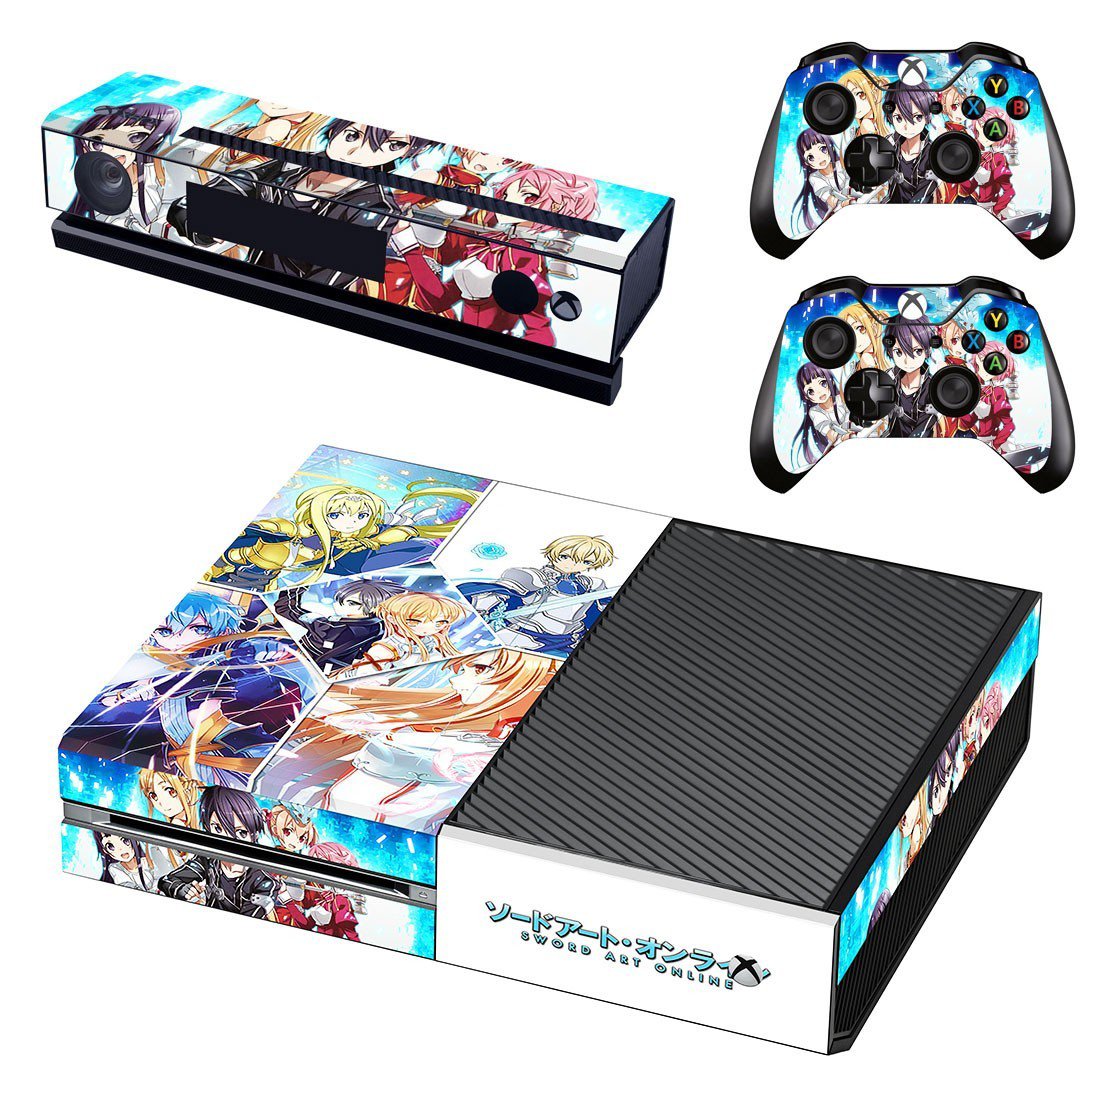 Xbox One And Controllers Skin Cover Sword Art Online